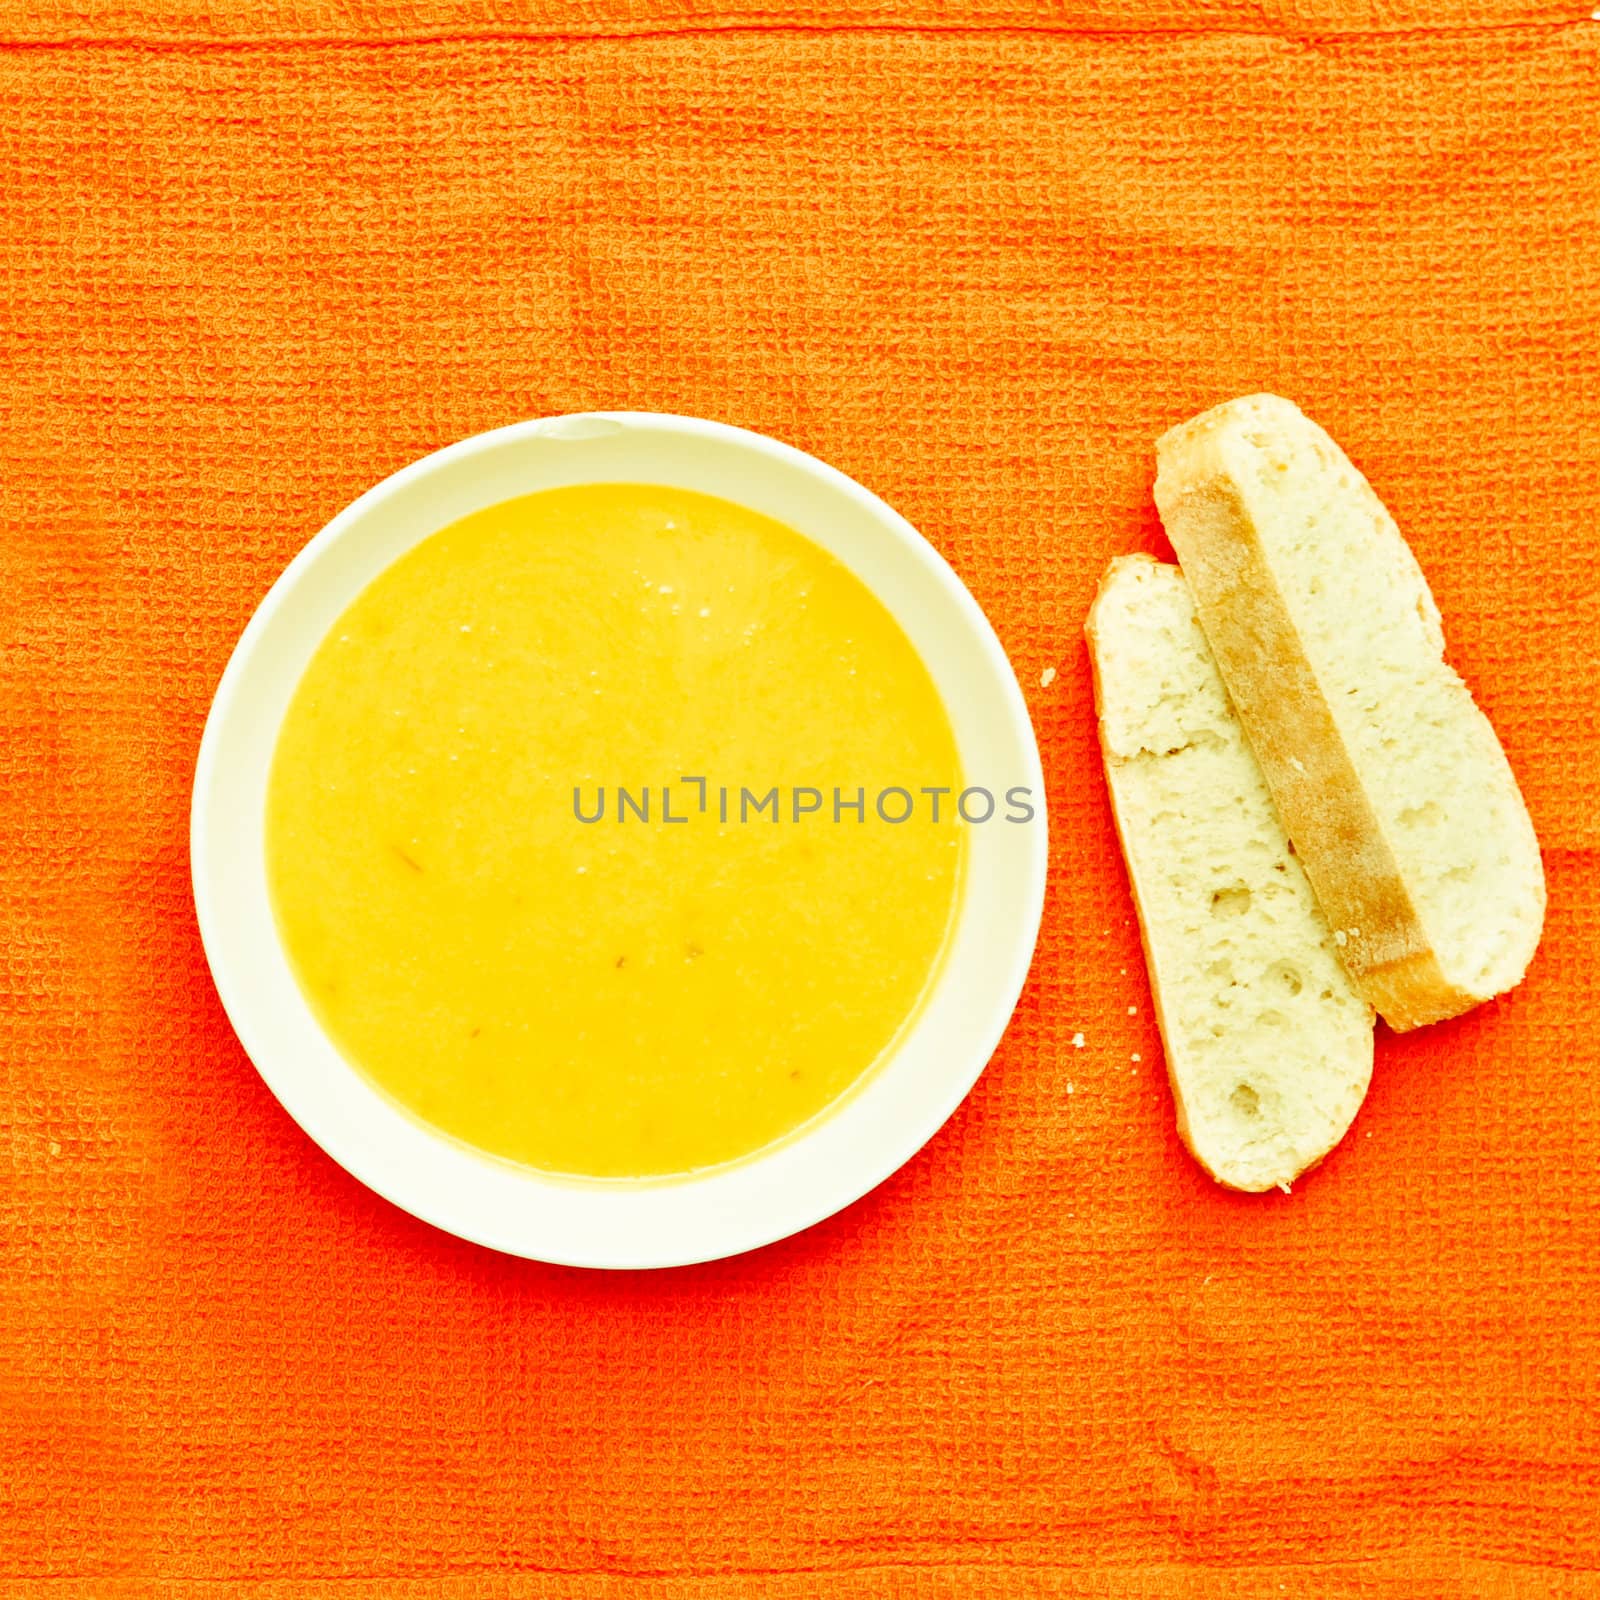 Butternut squash soup and fresh bread on a cloth